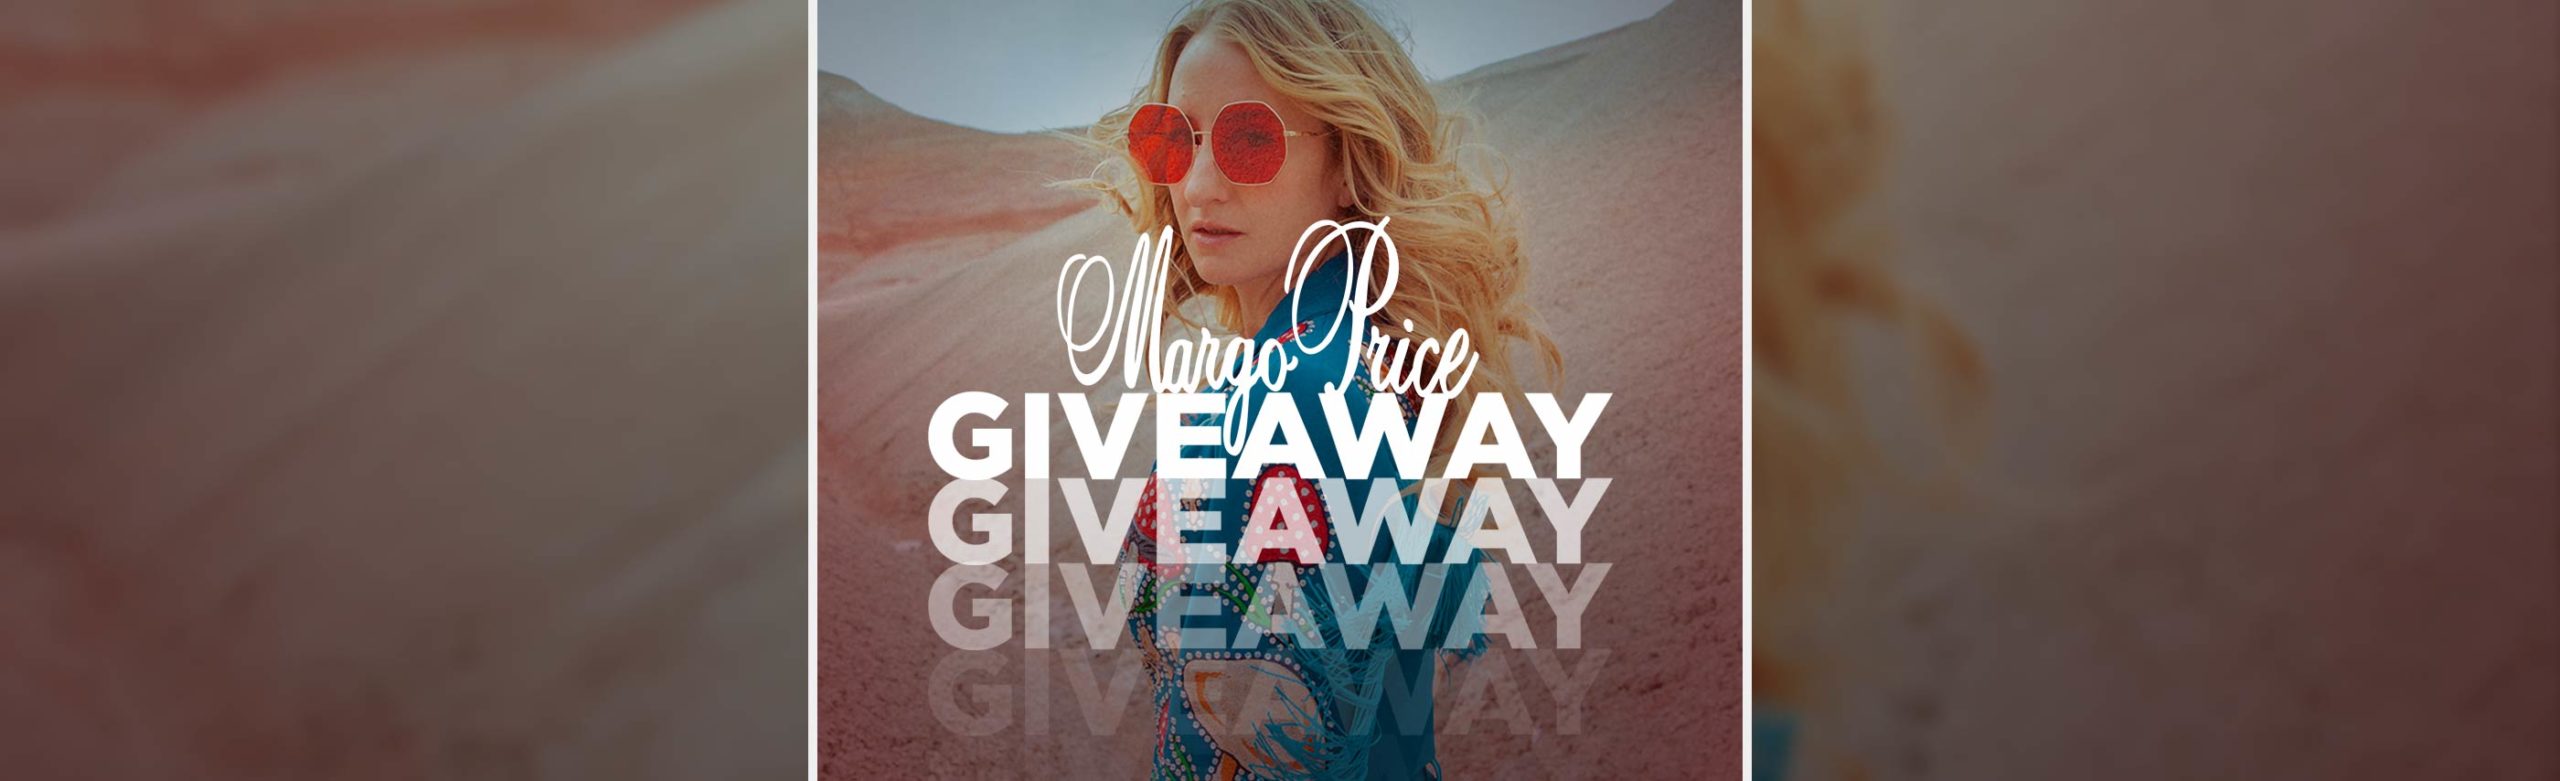 Win Tickets to Margo Price in Bozeman Plus Vinyl and Special Koozie Image